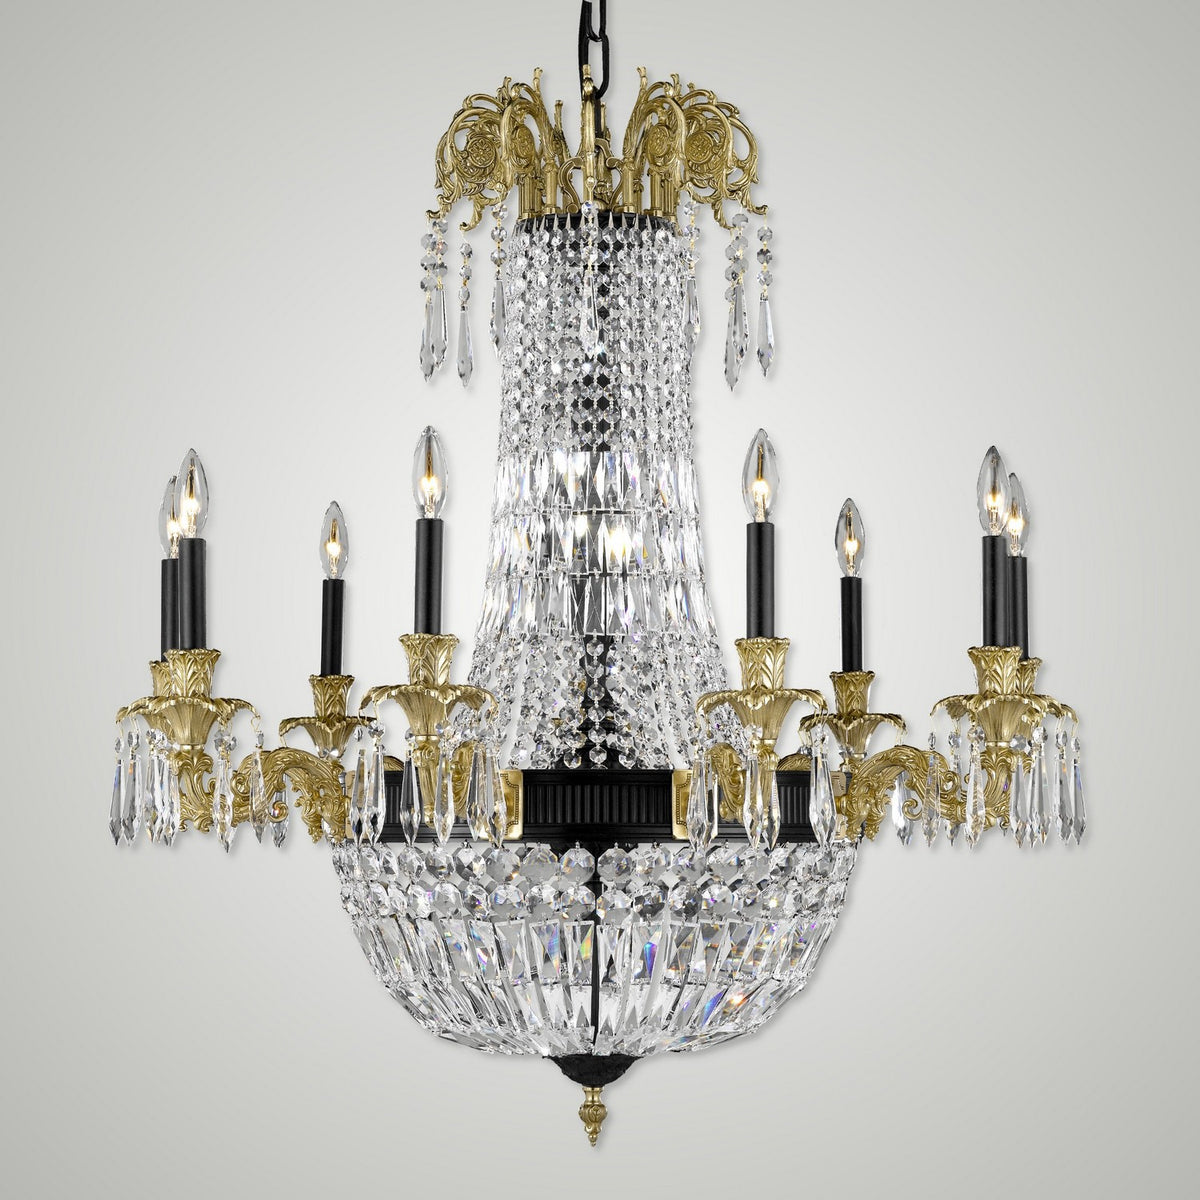 Finisterra Brass and Crystal Chandelier